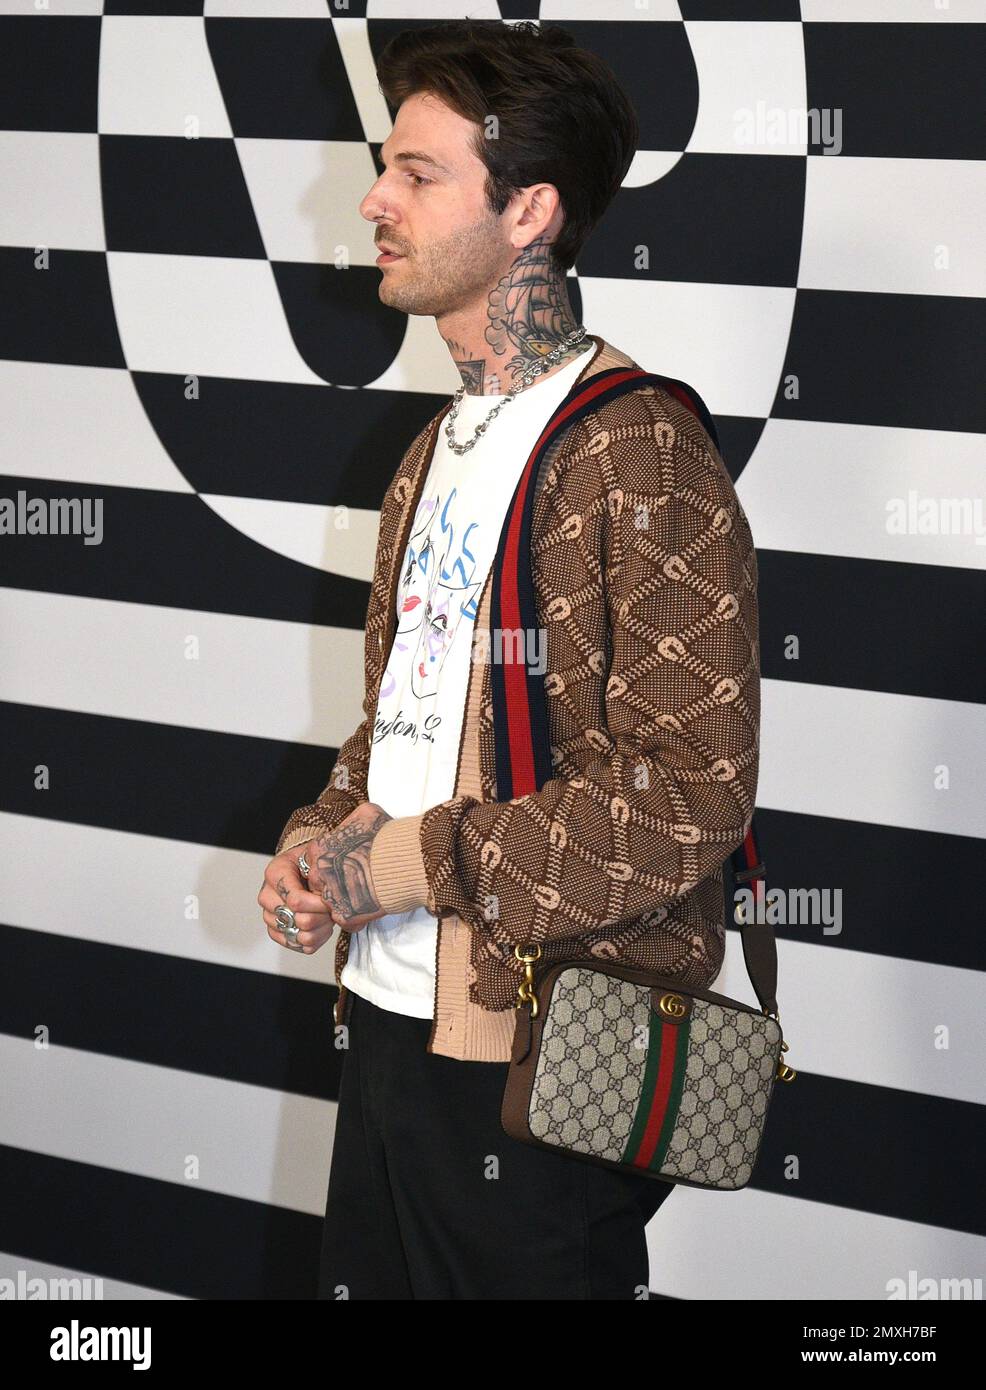 Hollywood, USA. 02. Februar 2023. Jesse Rutherford nimmt am 02. Februar 2023 an der Warner Music Group Pre-Grammy Party im Hollywood Athletic Club in Hollywood, Kalifornien, Teil. Foto: Annie Lesser/imageSPACE Credit: Imagespace/Alamy Live News Stockfoto